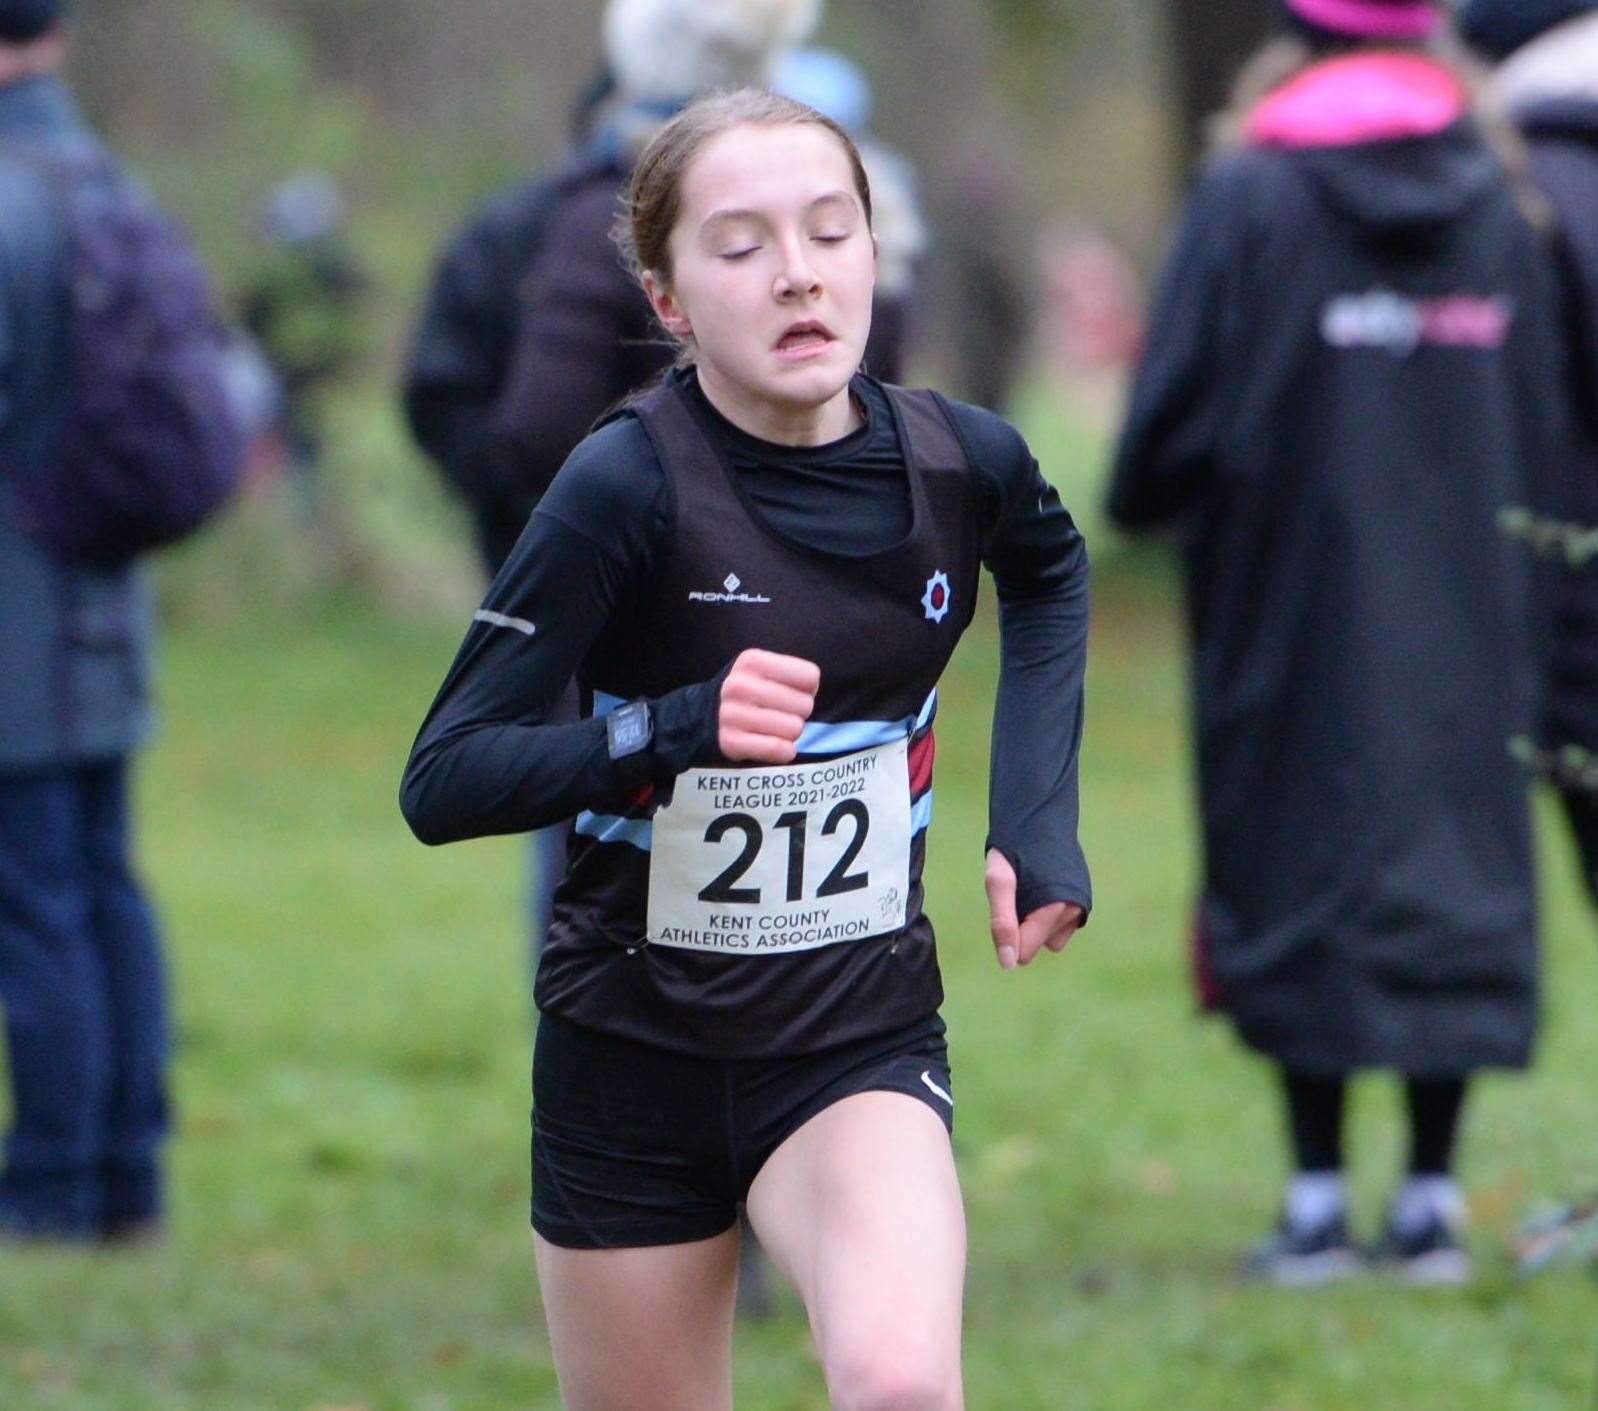 Megan Slattery of Blackheath & Bromley was best of the rest in the under-15 girls' category. Picture: Chris Davey (53364424)